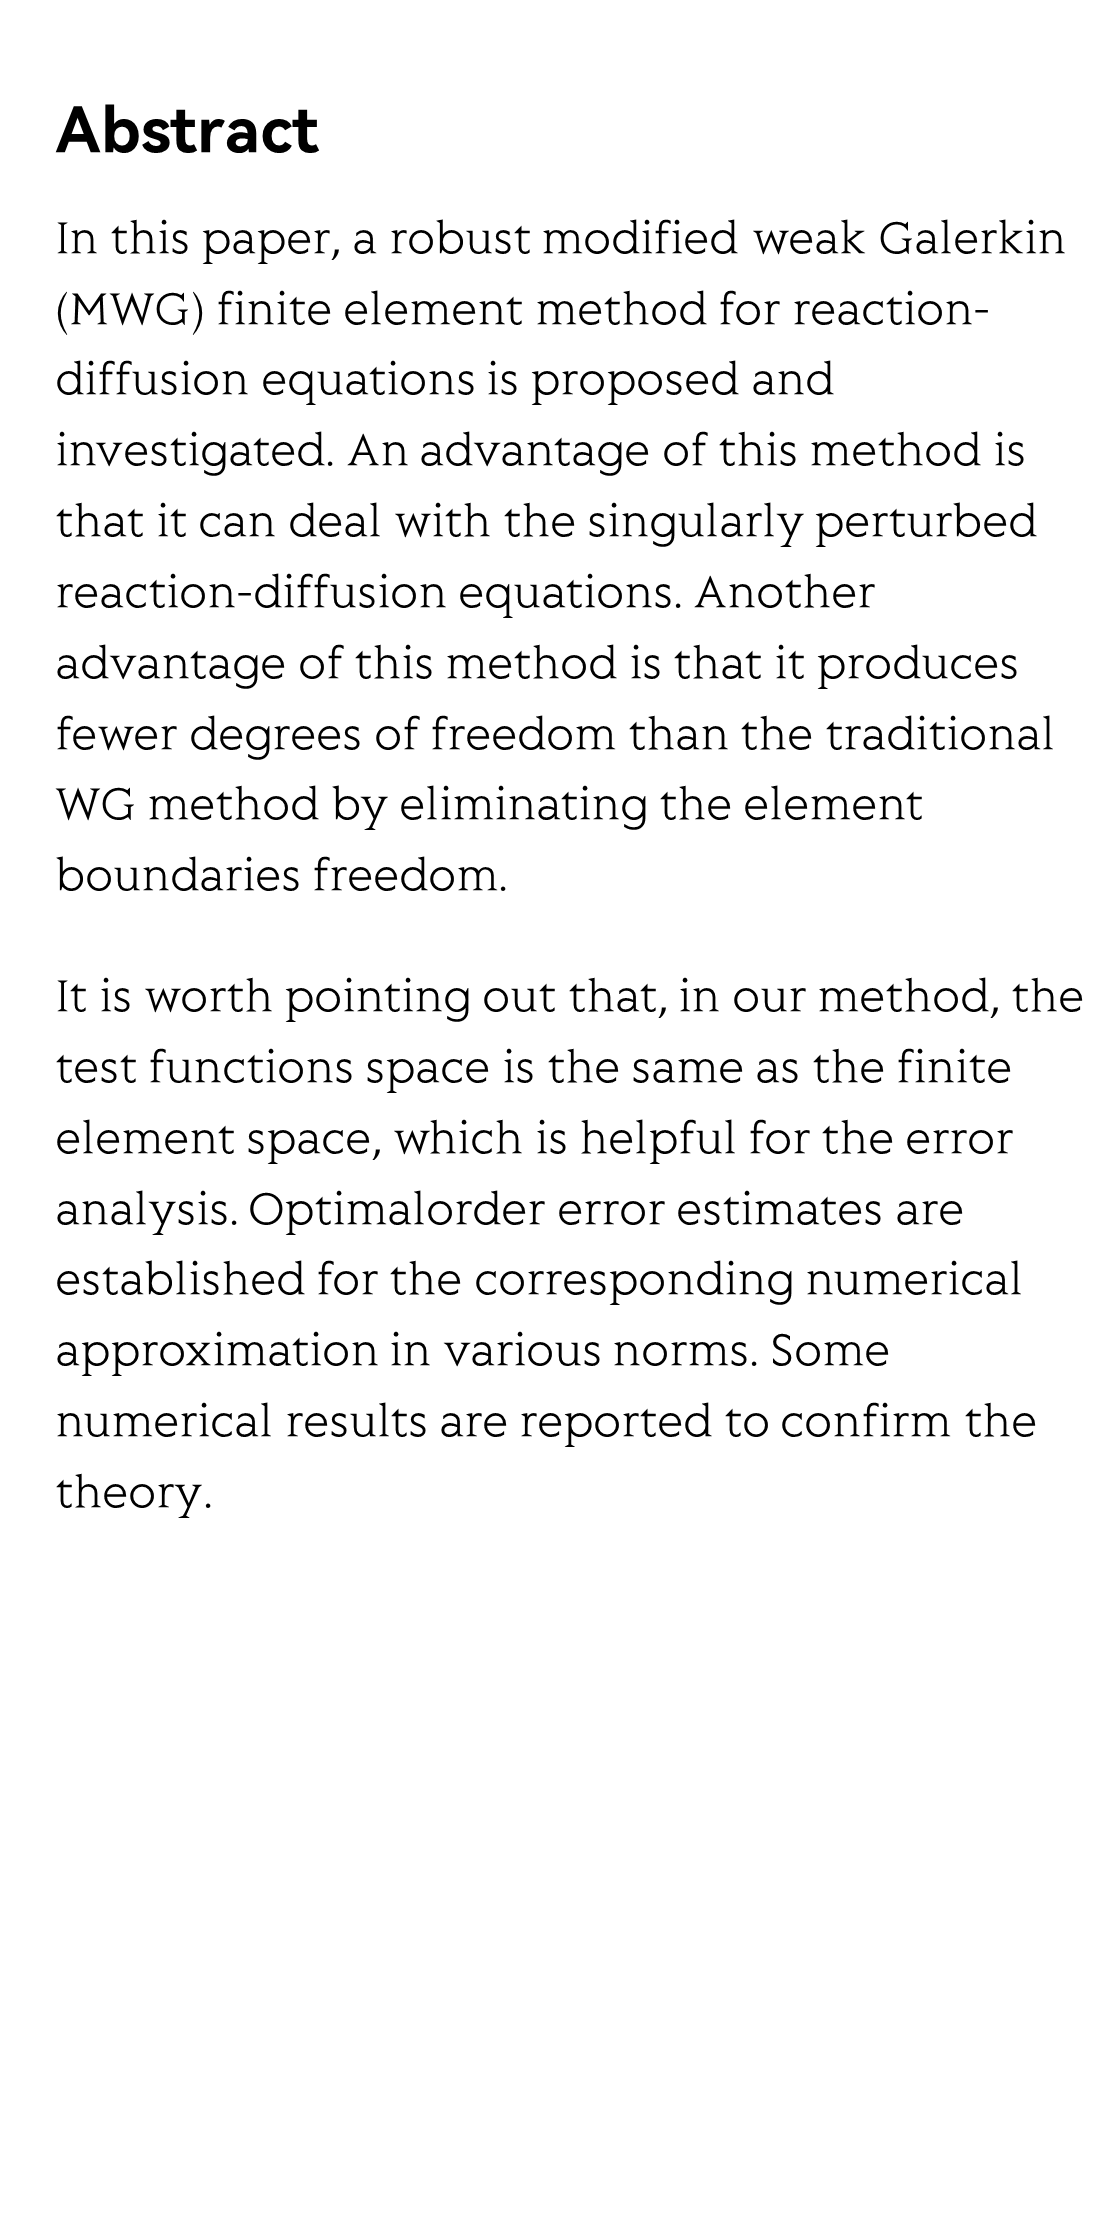 A Robust Modified Weak Galerkin Finite Element Method for Reaction-Diffusion Equations_2